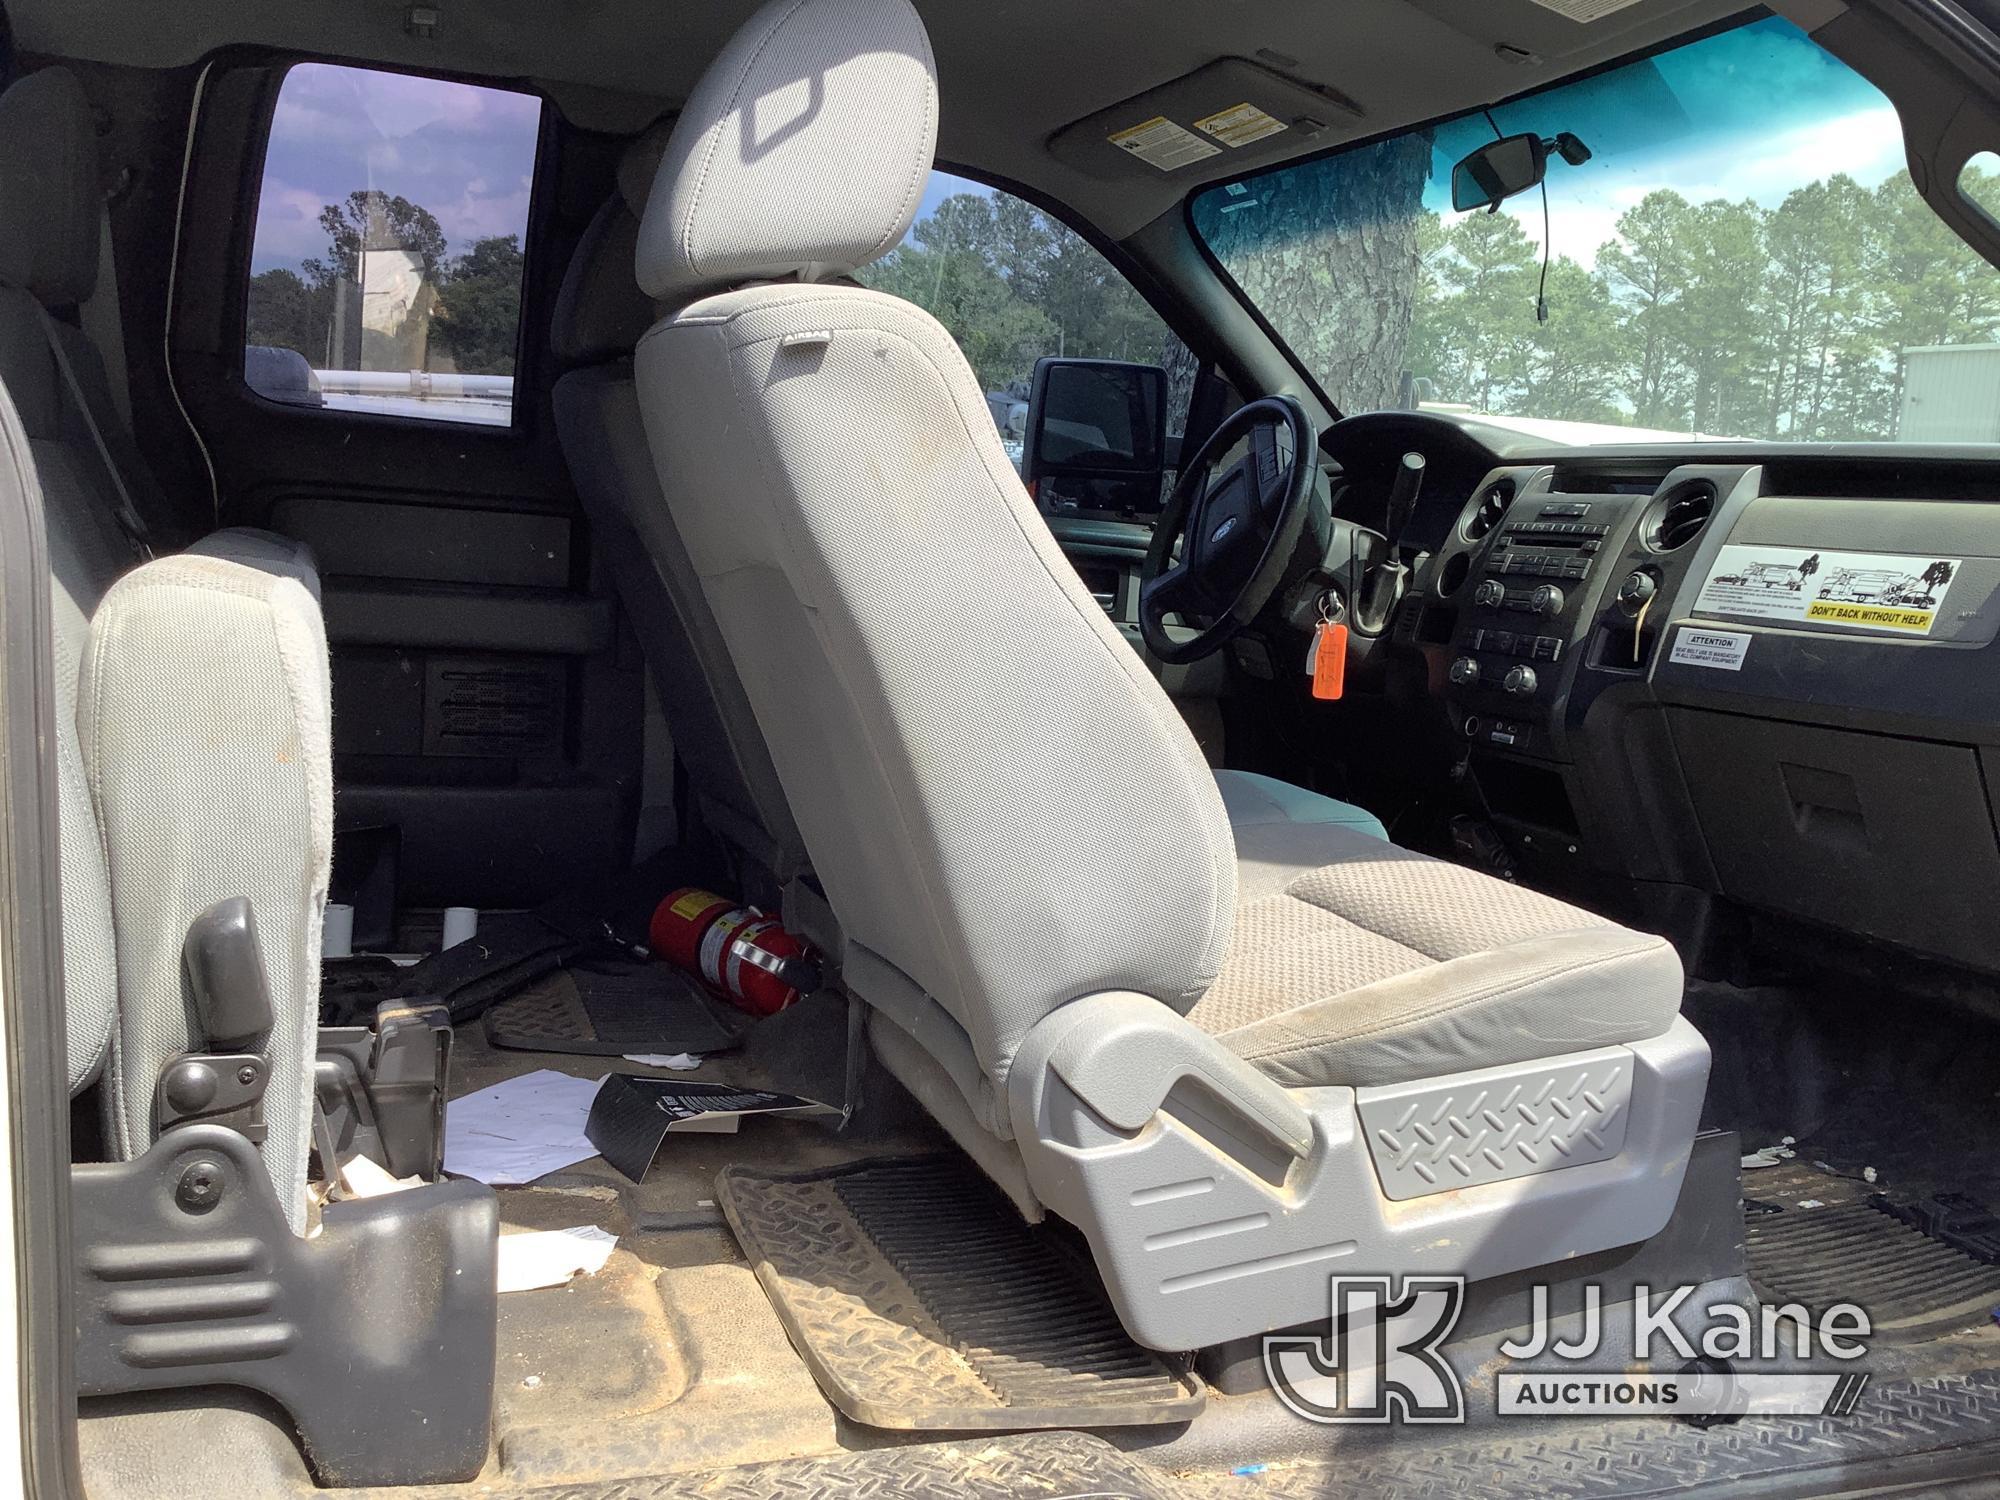 (Graysville, AL) 2013 Ford F150 Extended-Cab Pickup Truck Not Running & Condition Unknown) (Needs Ba